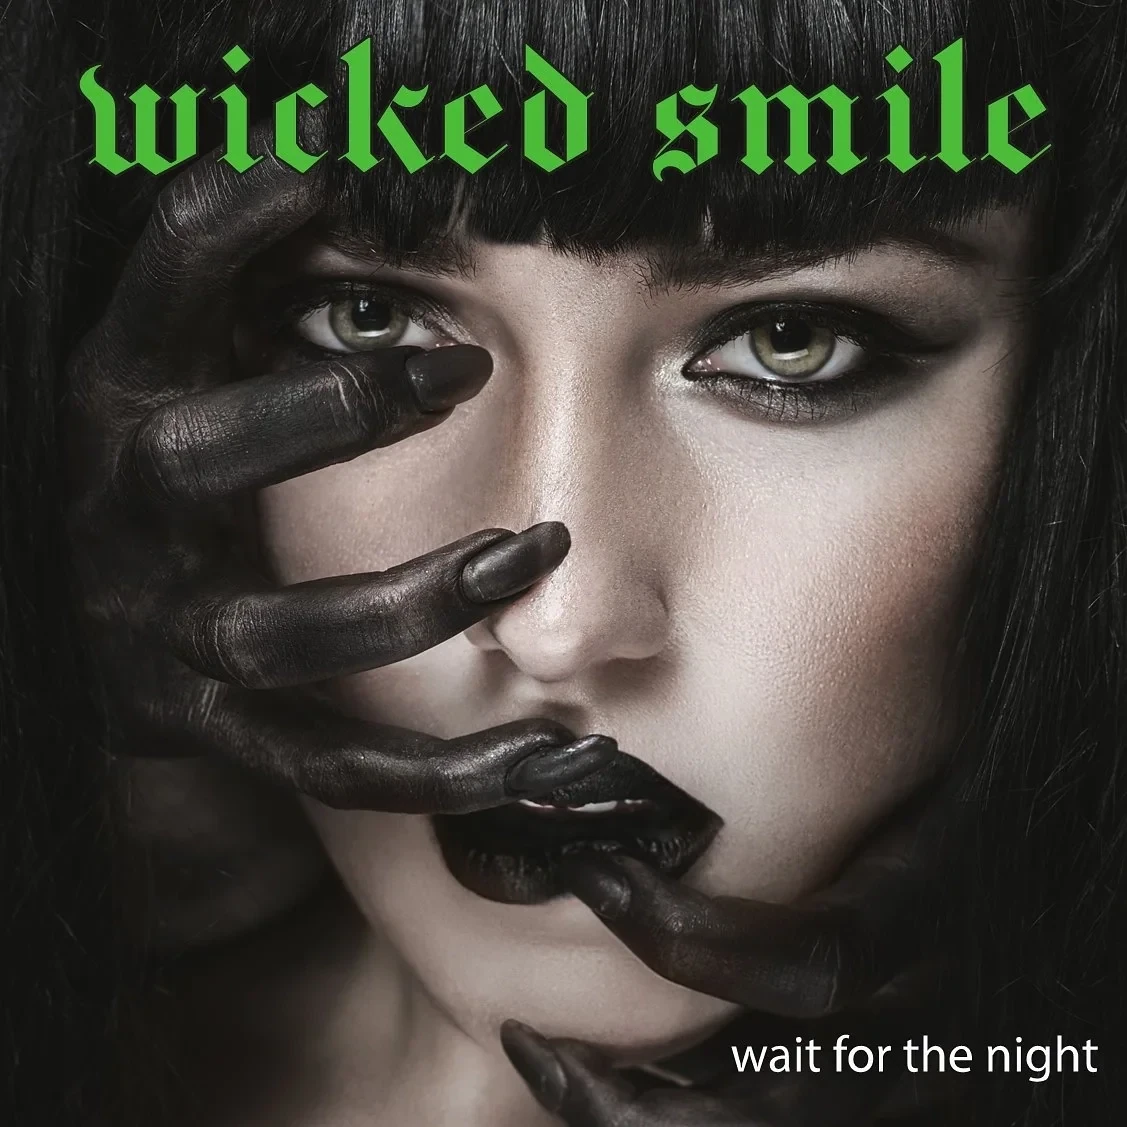 Wicked Smile - Wait For The night cd (U.S.A. orders only)